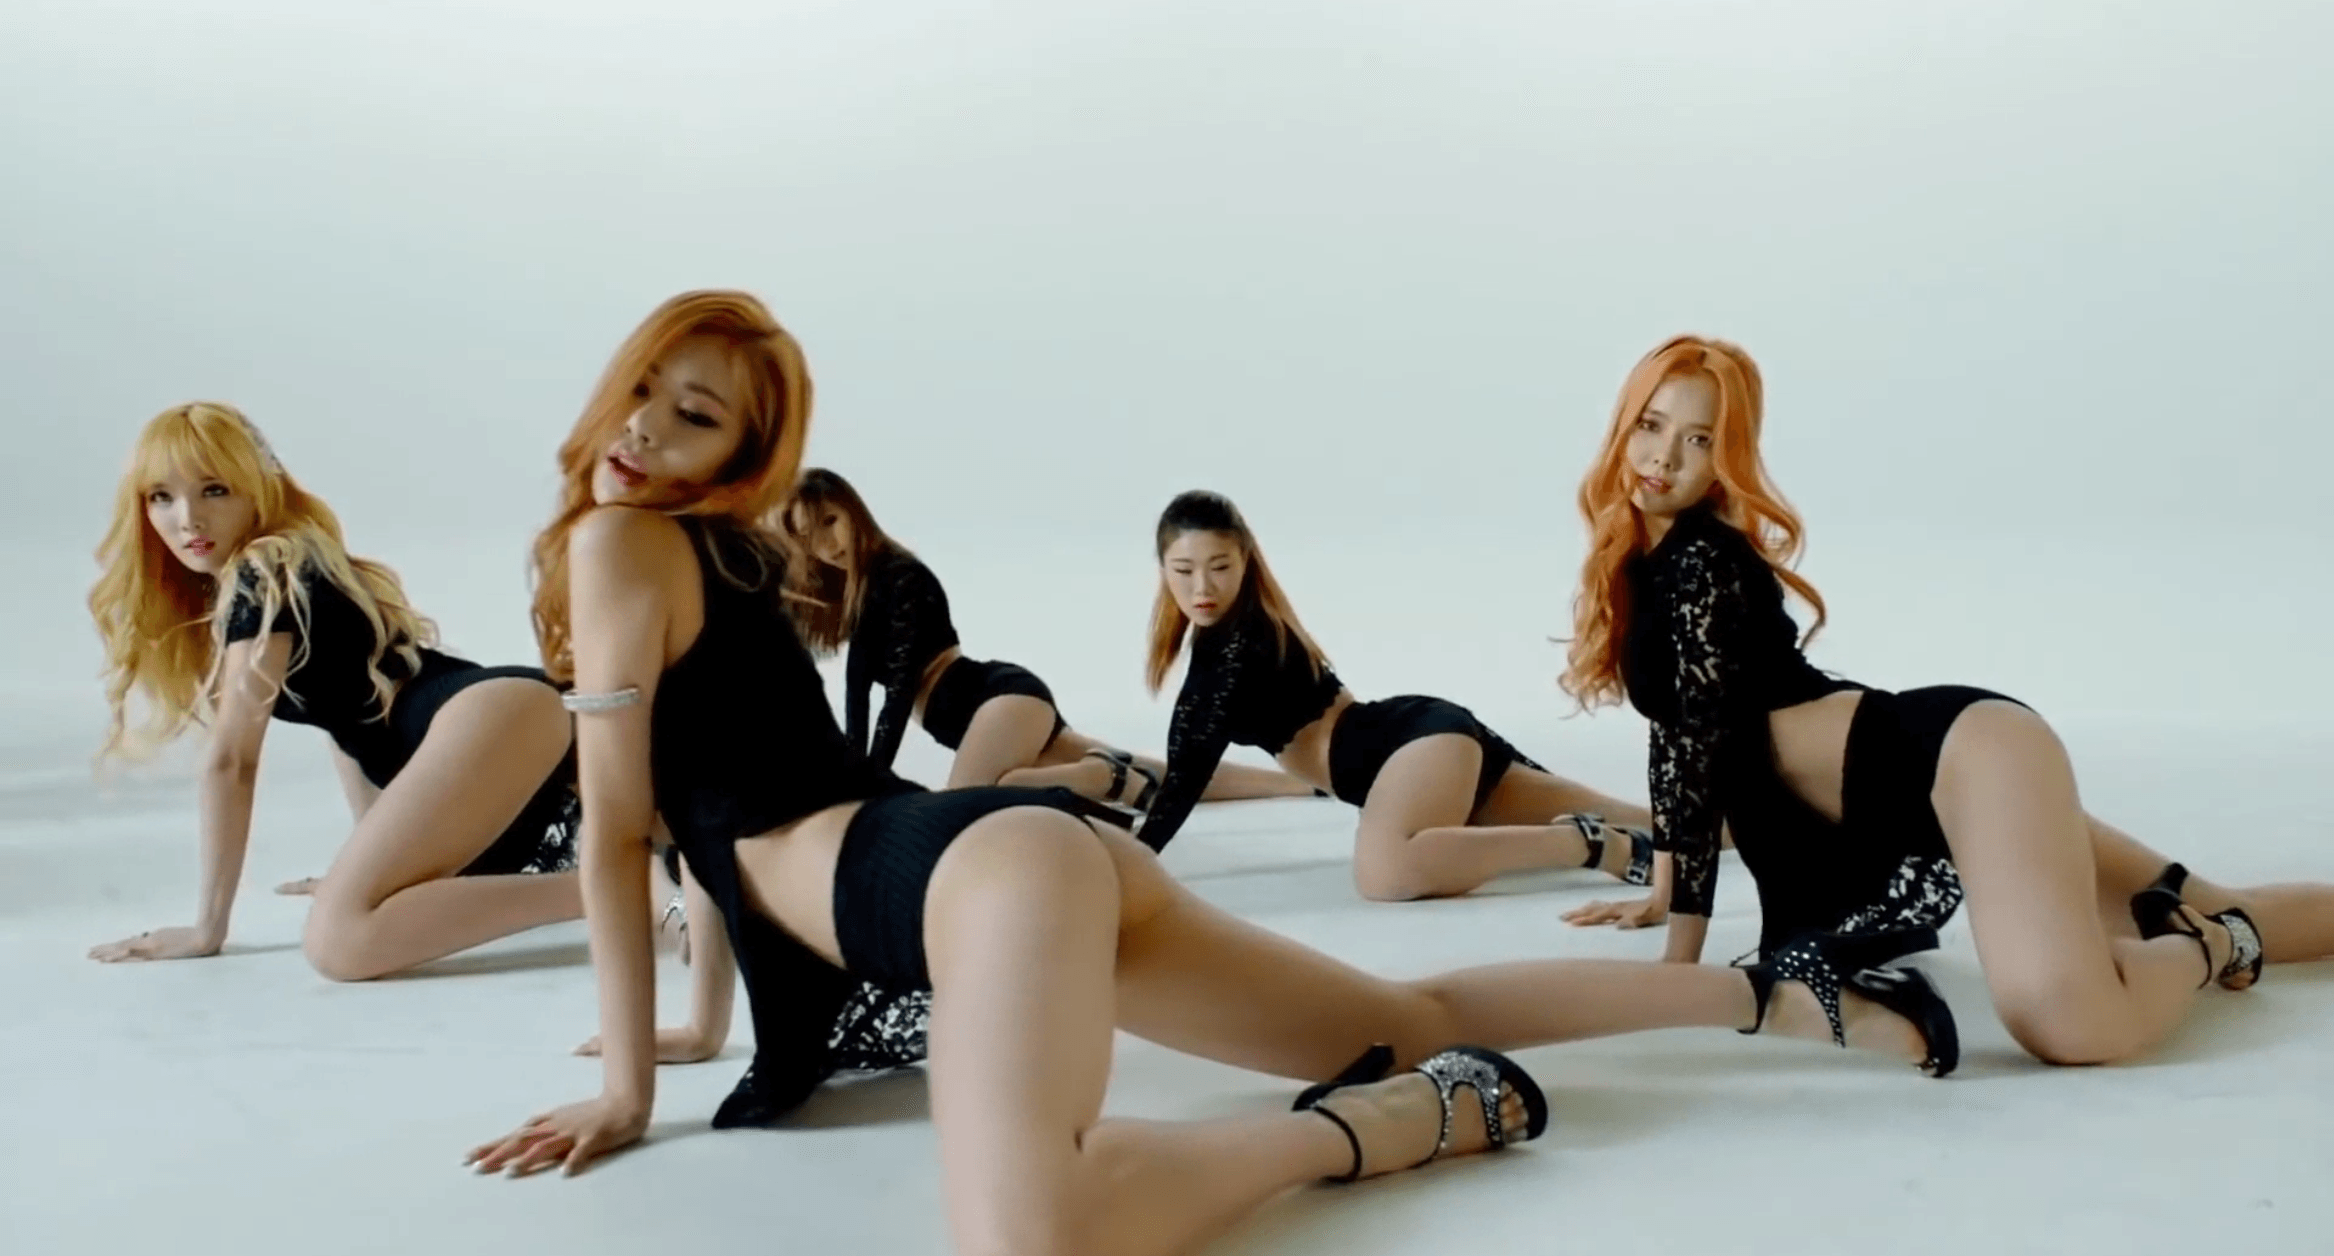 Fans of Stellar couldn't wait for a music video